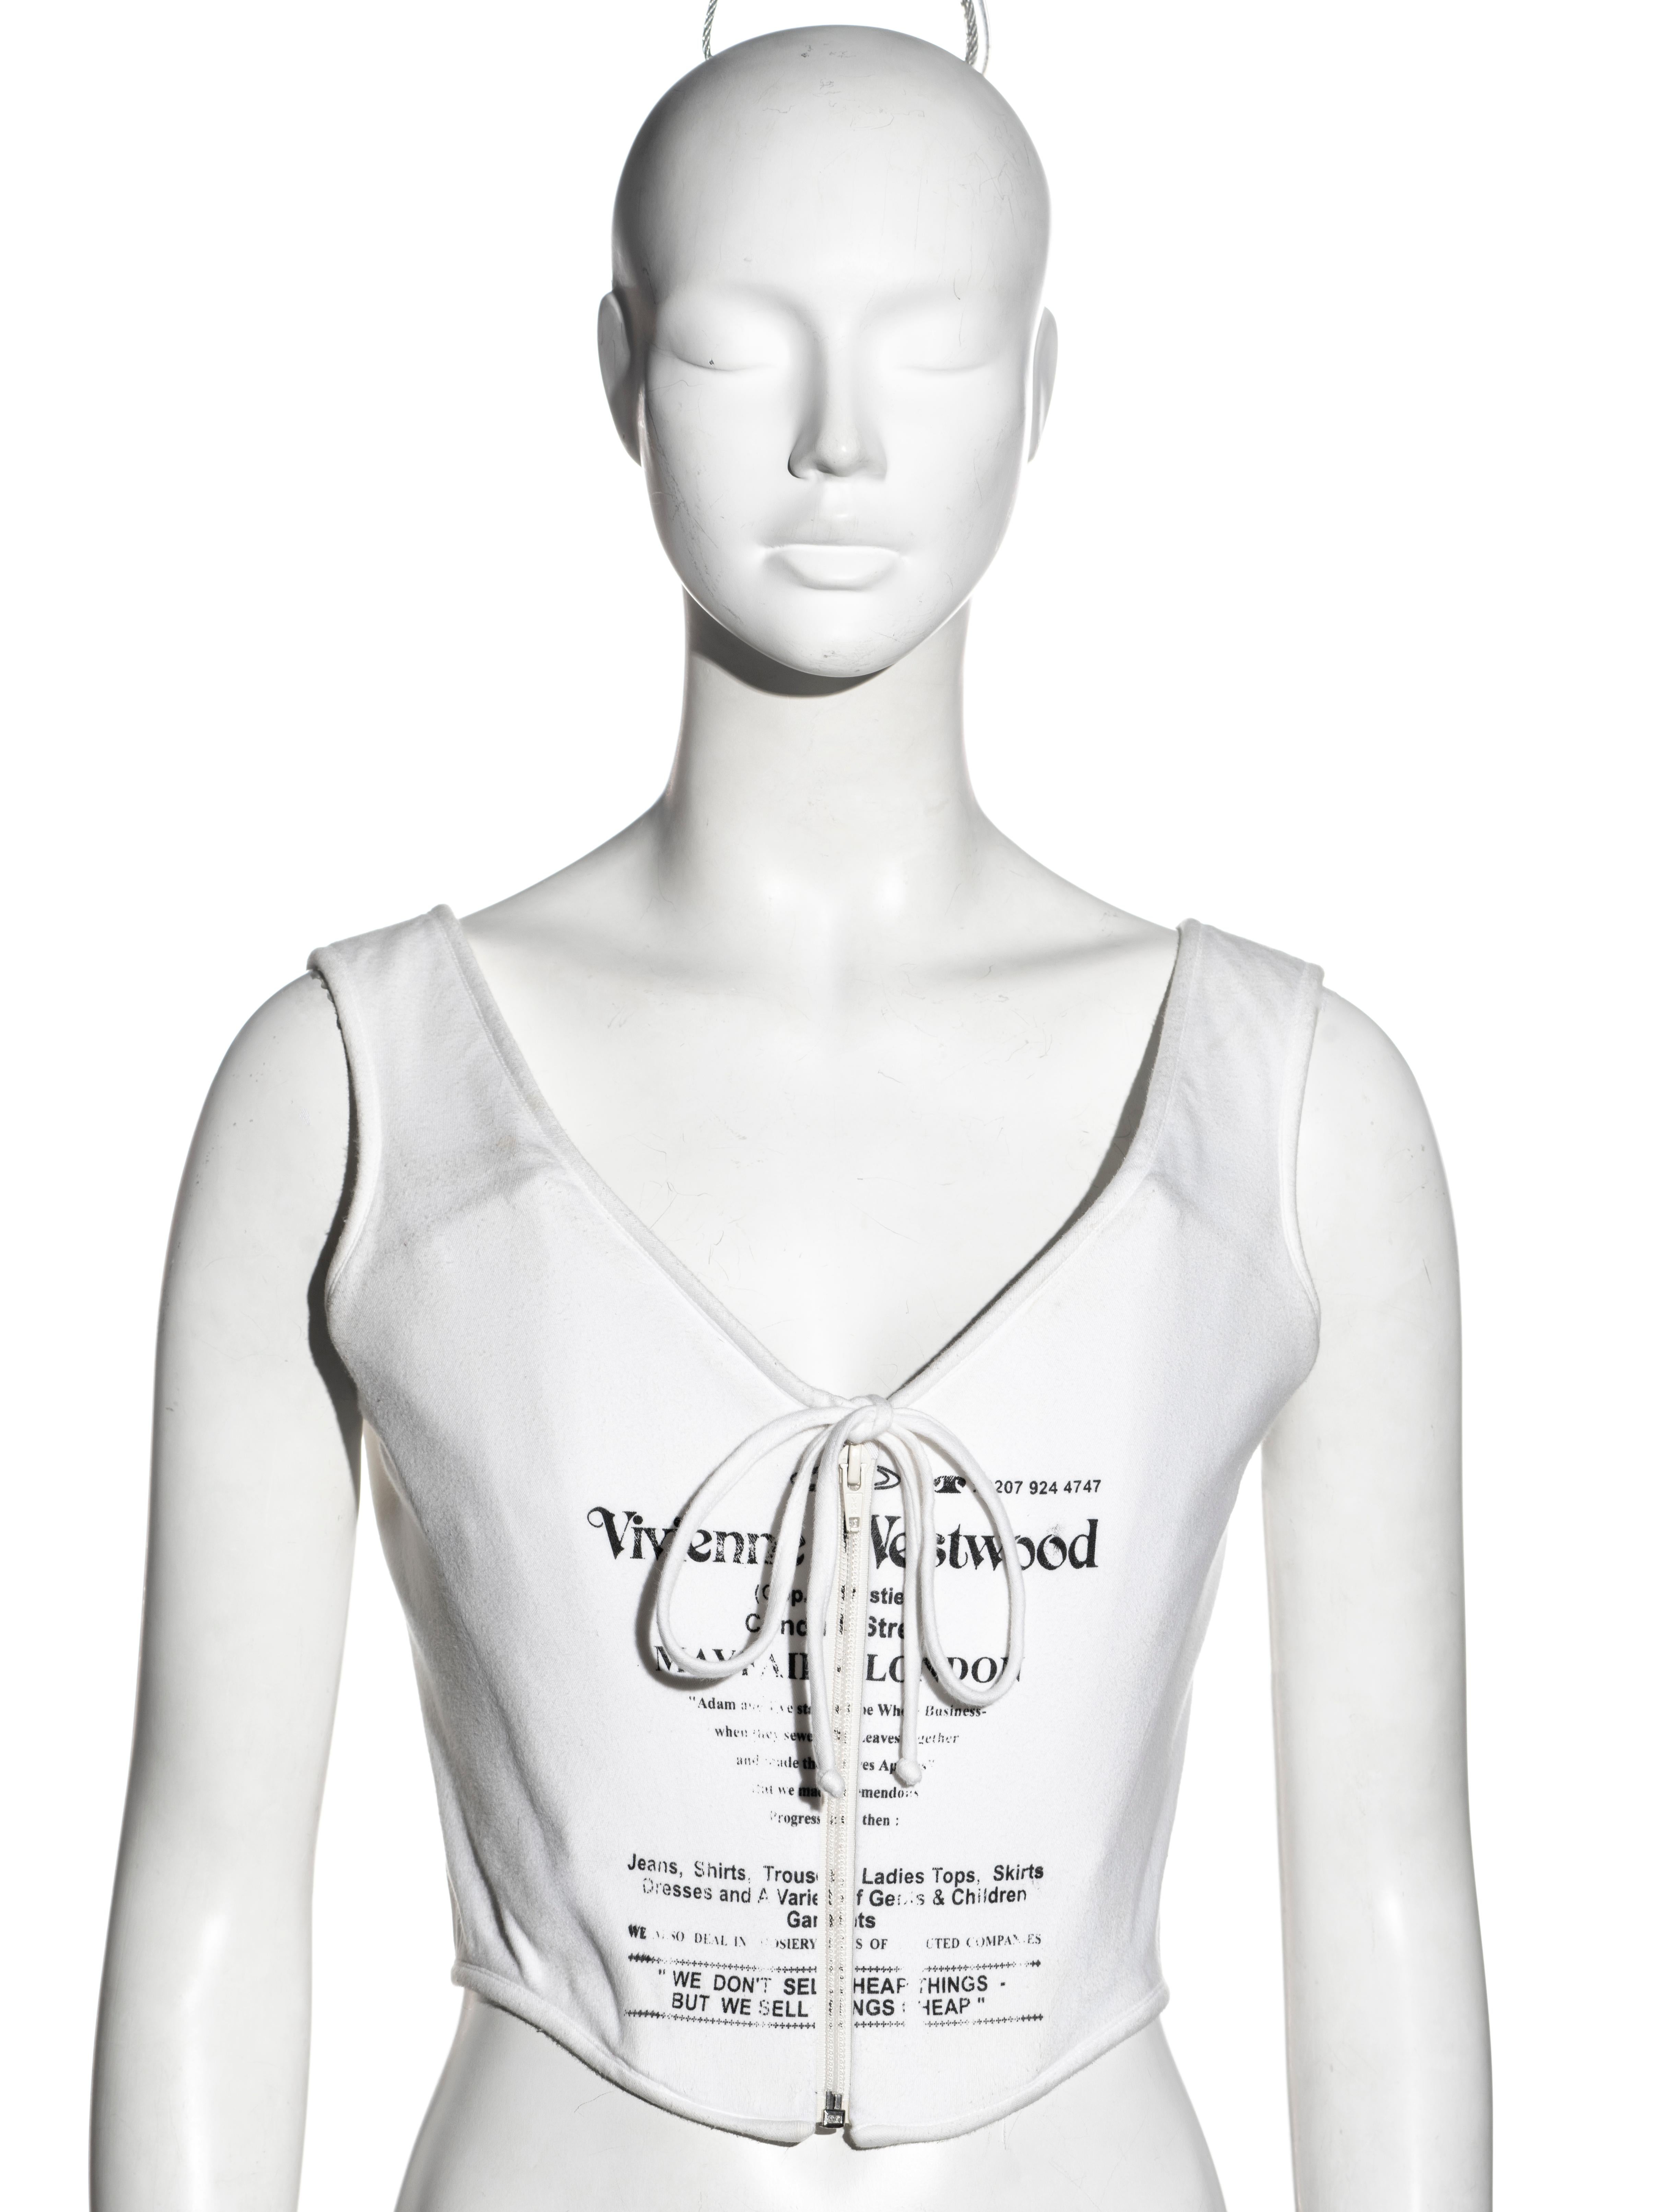 ▪ Vivienne Westwood corset top
▪ Sold by One of a Kind Archive
▪ Spring-Summer 2002
▪ White cotton jersey 
▪ Black text print of a Vivienne Westwood flyer, advertising the Conduit Street store in London
▪ Centre-front zipper
▪ Gold label 
▪ UK 14